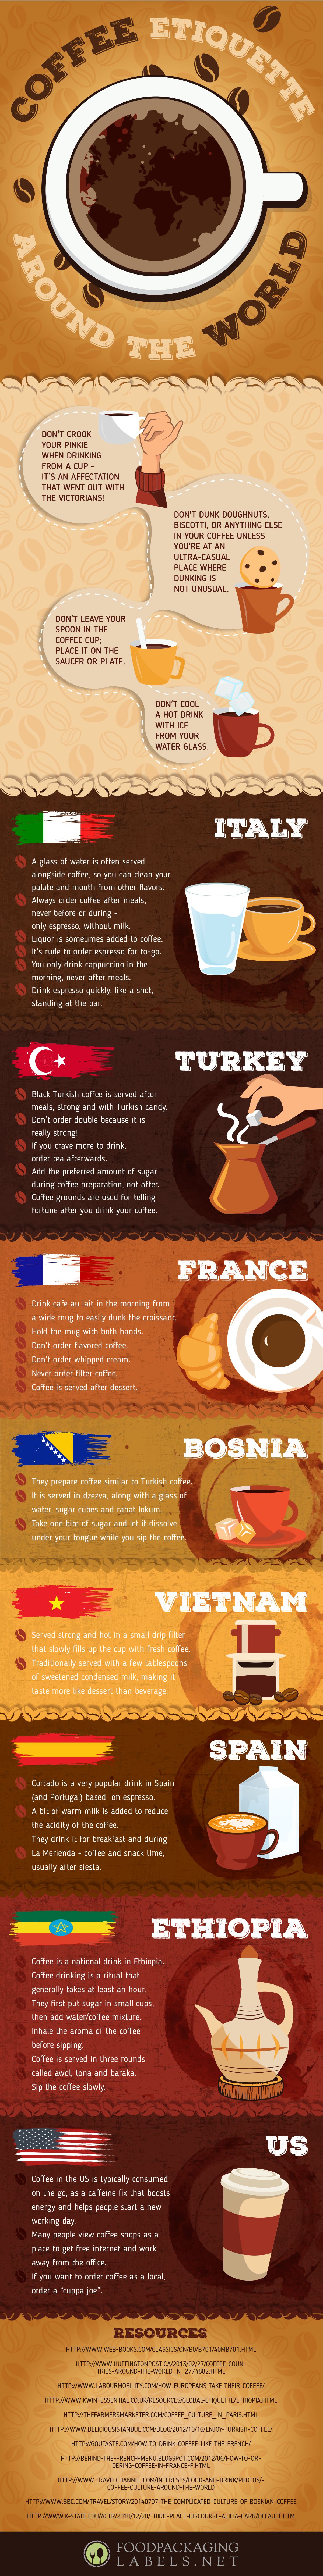 Coffee etiquette: dos and don'ts in the coffee realm